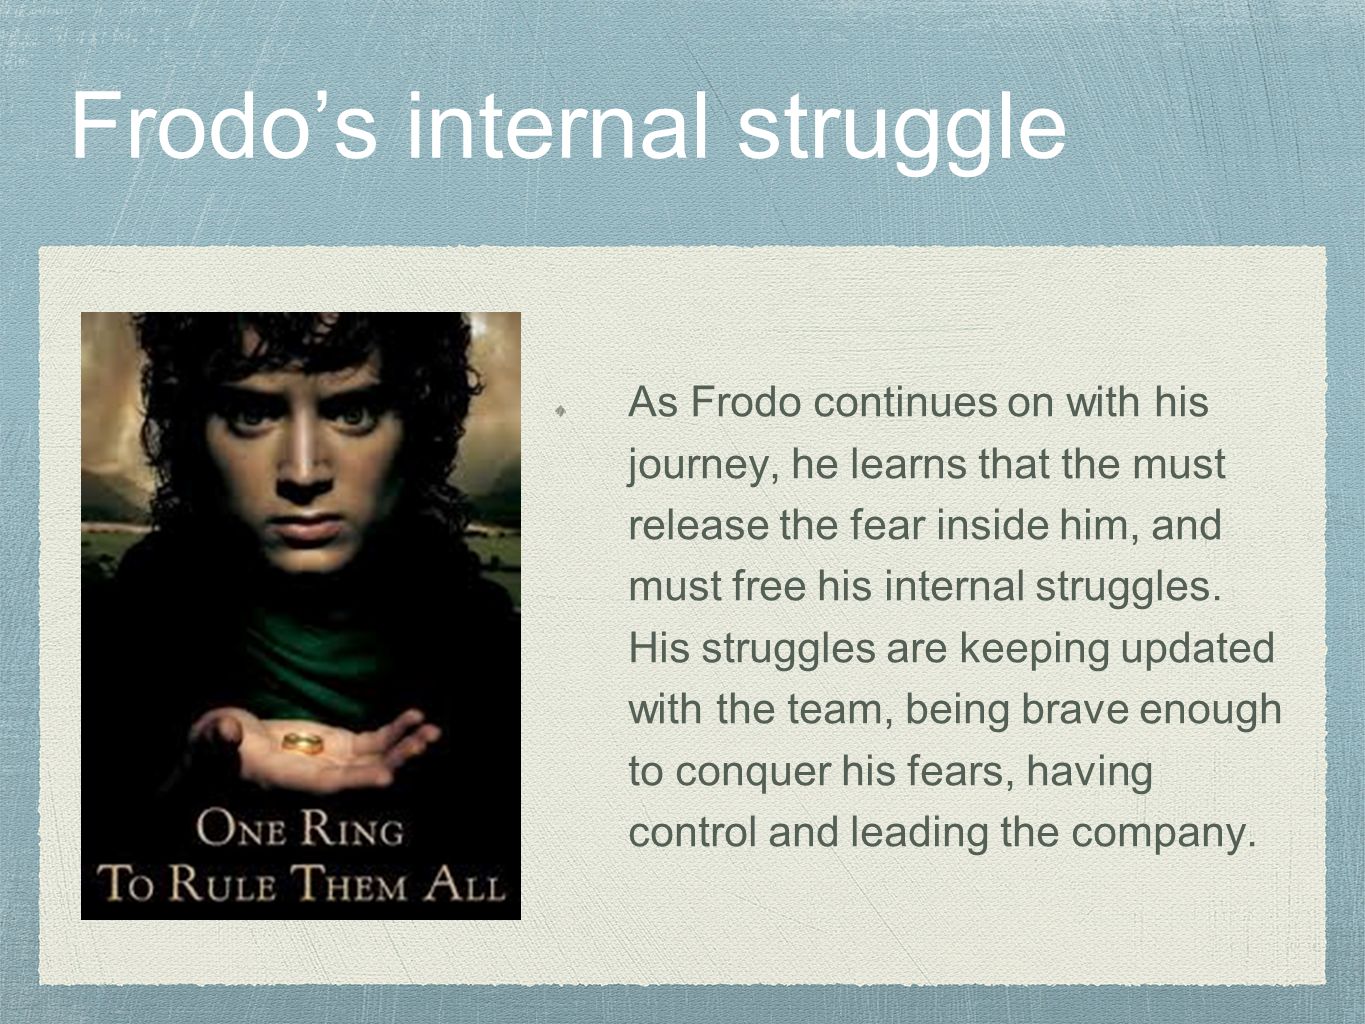 Frodo’s internal struggle As Frodo continues on with his journey, he learns that the must release the fear inside him, and must free his internal struggles.